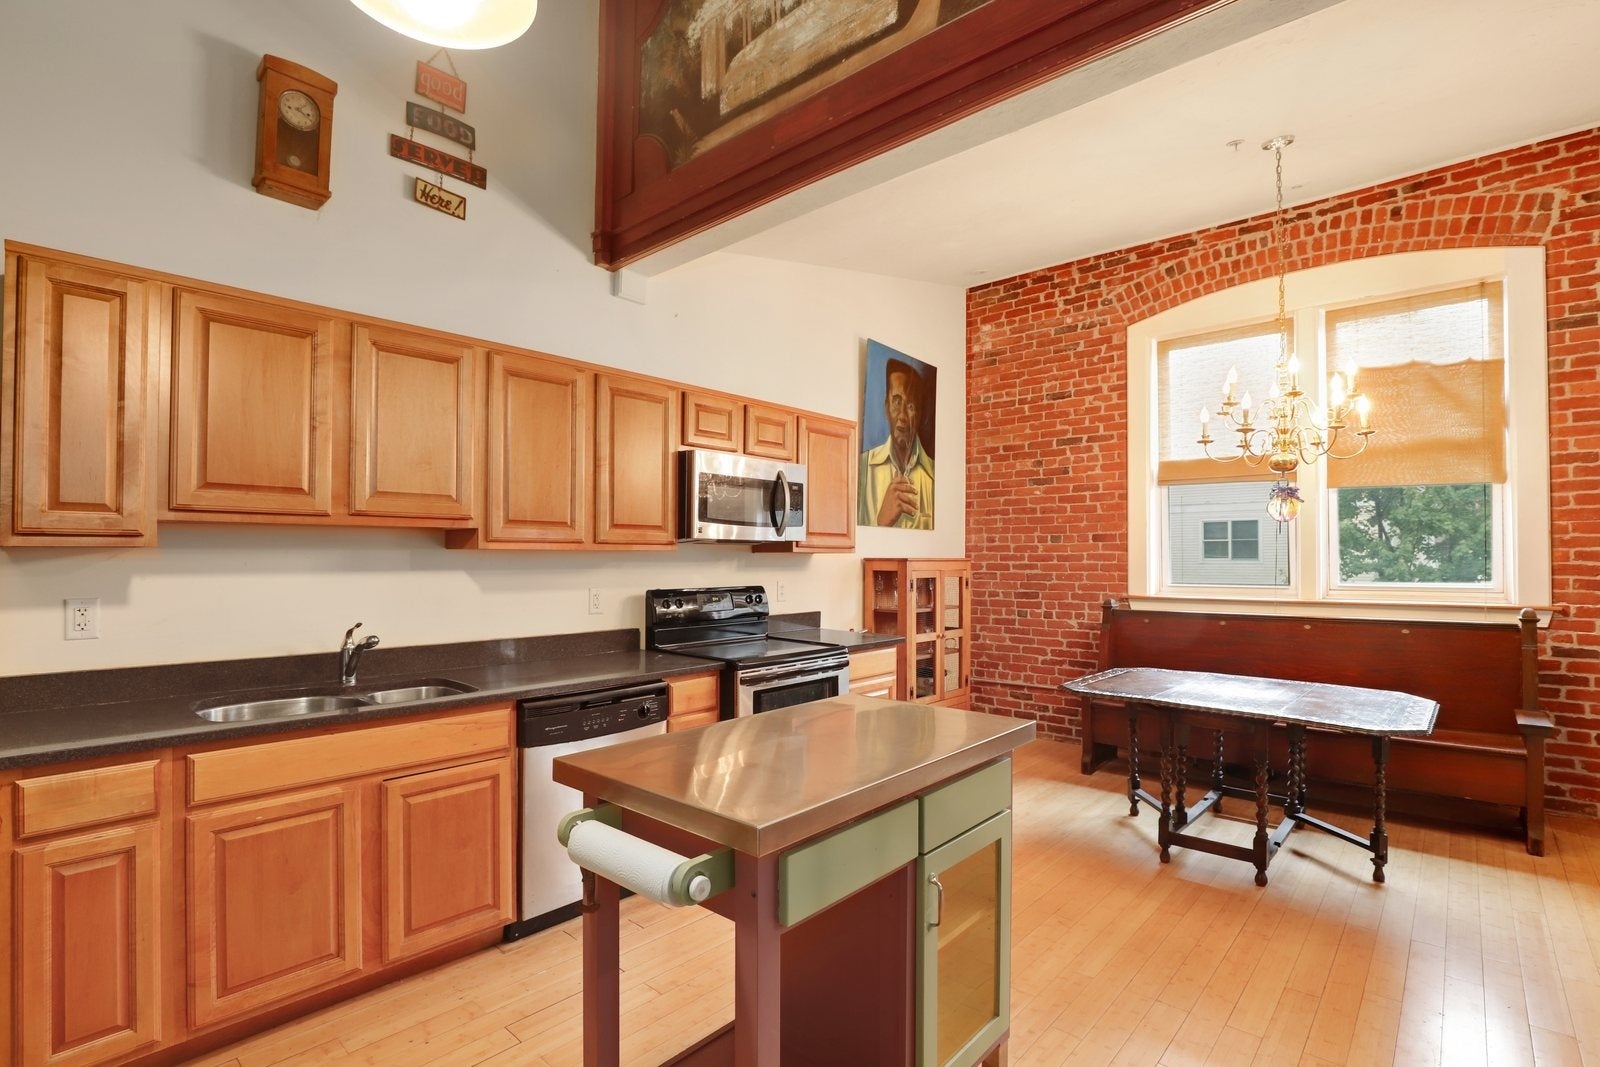 A kitchen with a mural above it and wood flooring and cabinetry.